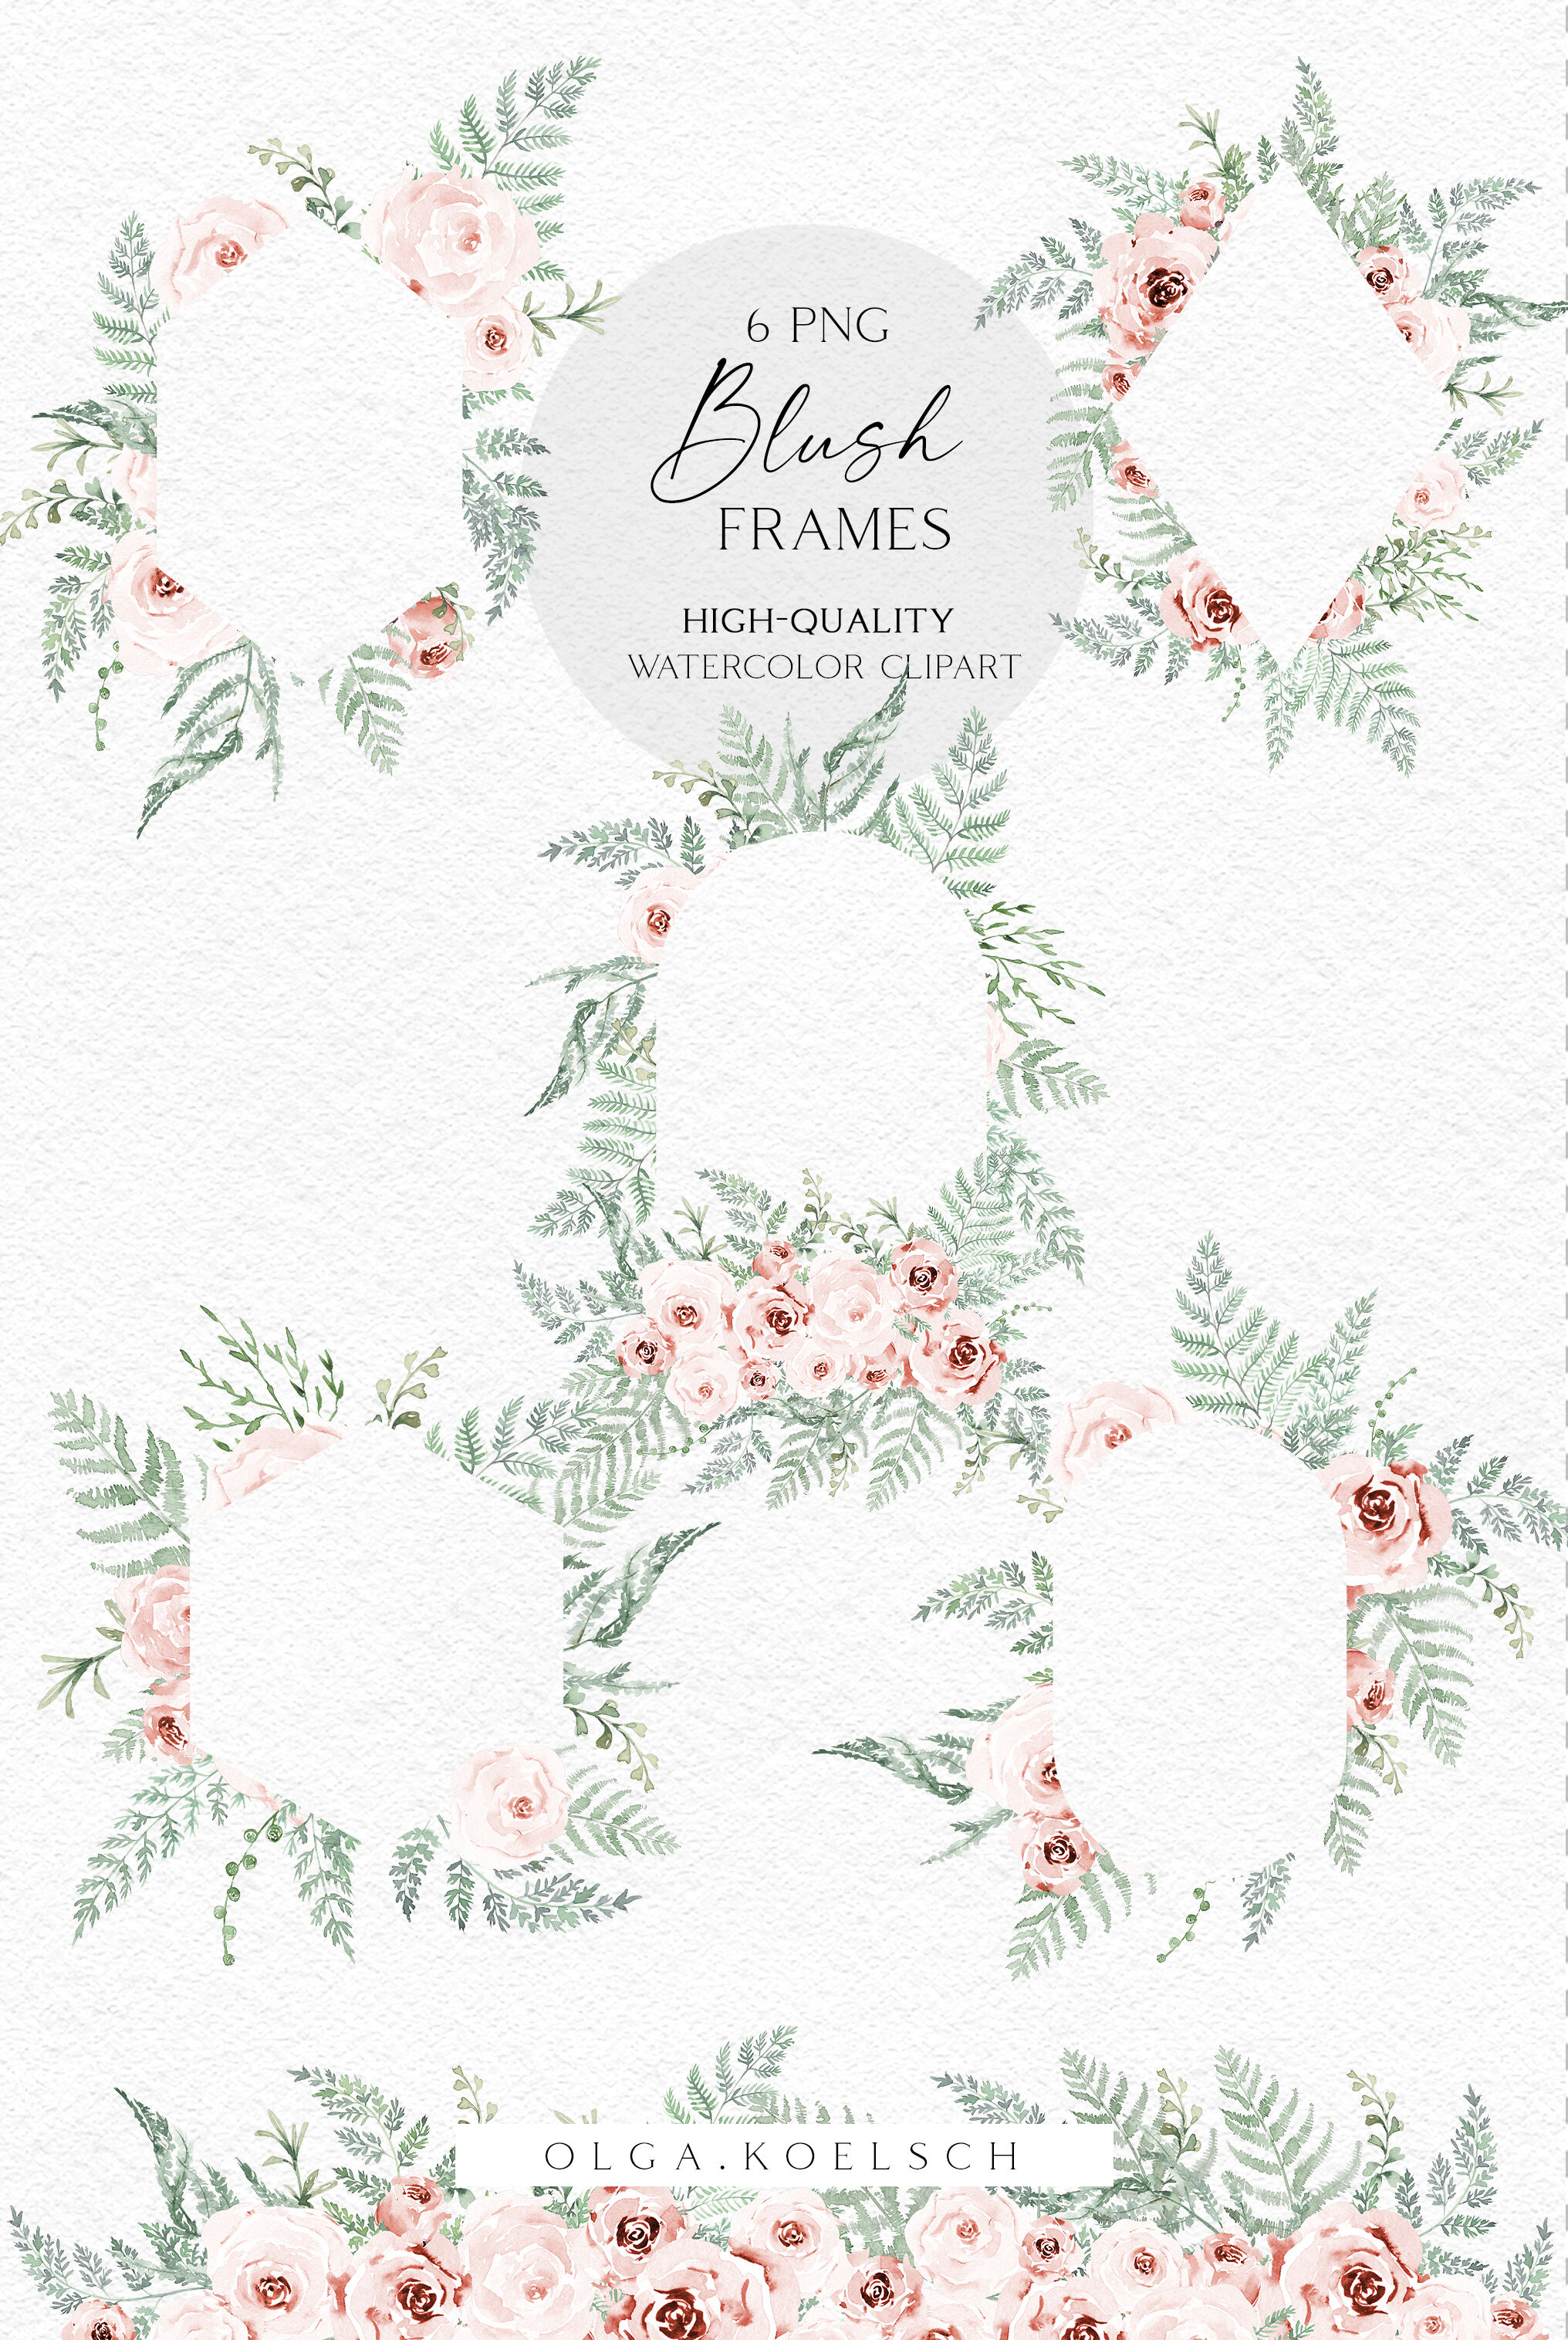 Boho roses frame clipart, Watercolor floral borders png, Wedding invit